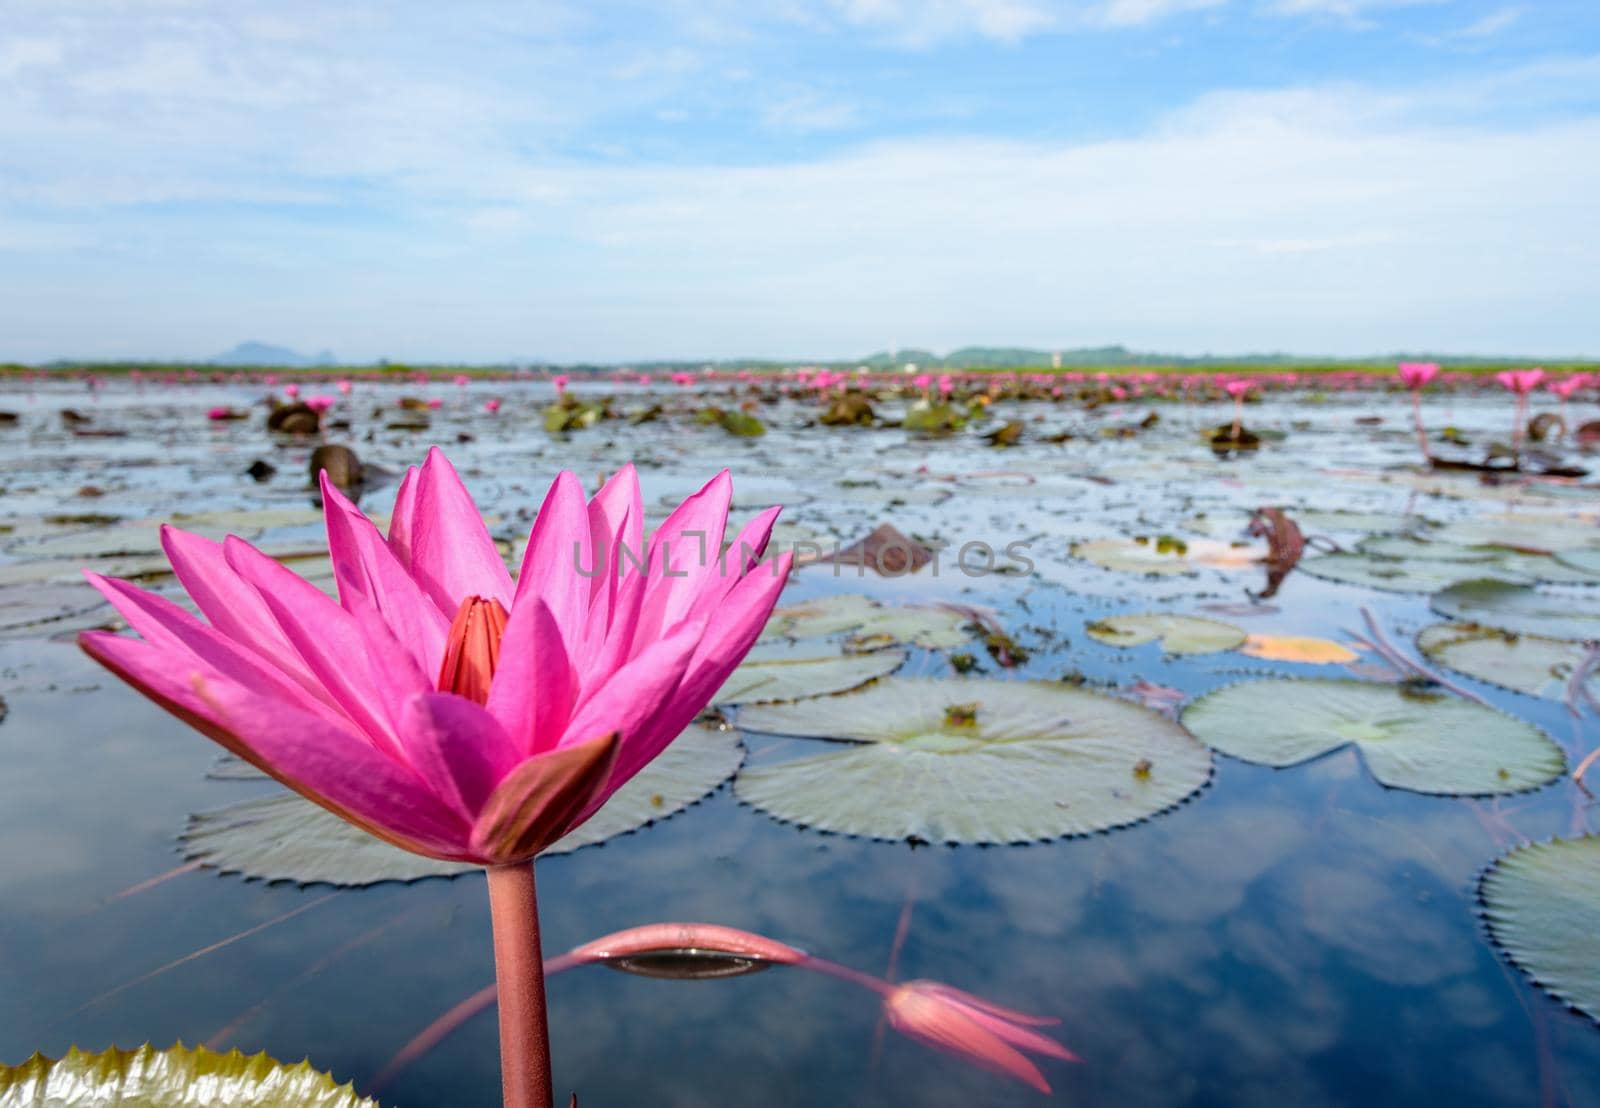 Beautiful nature landscape of many red lotus flowers, close up Red Indian Water Lily or Nymphaea Lotus in the pond at Thale Noi Waterfowl Reserve Park, Phatthalung province, Thailand